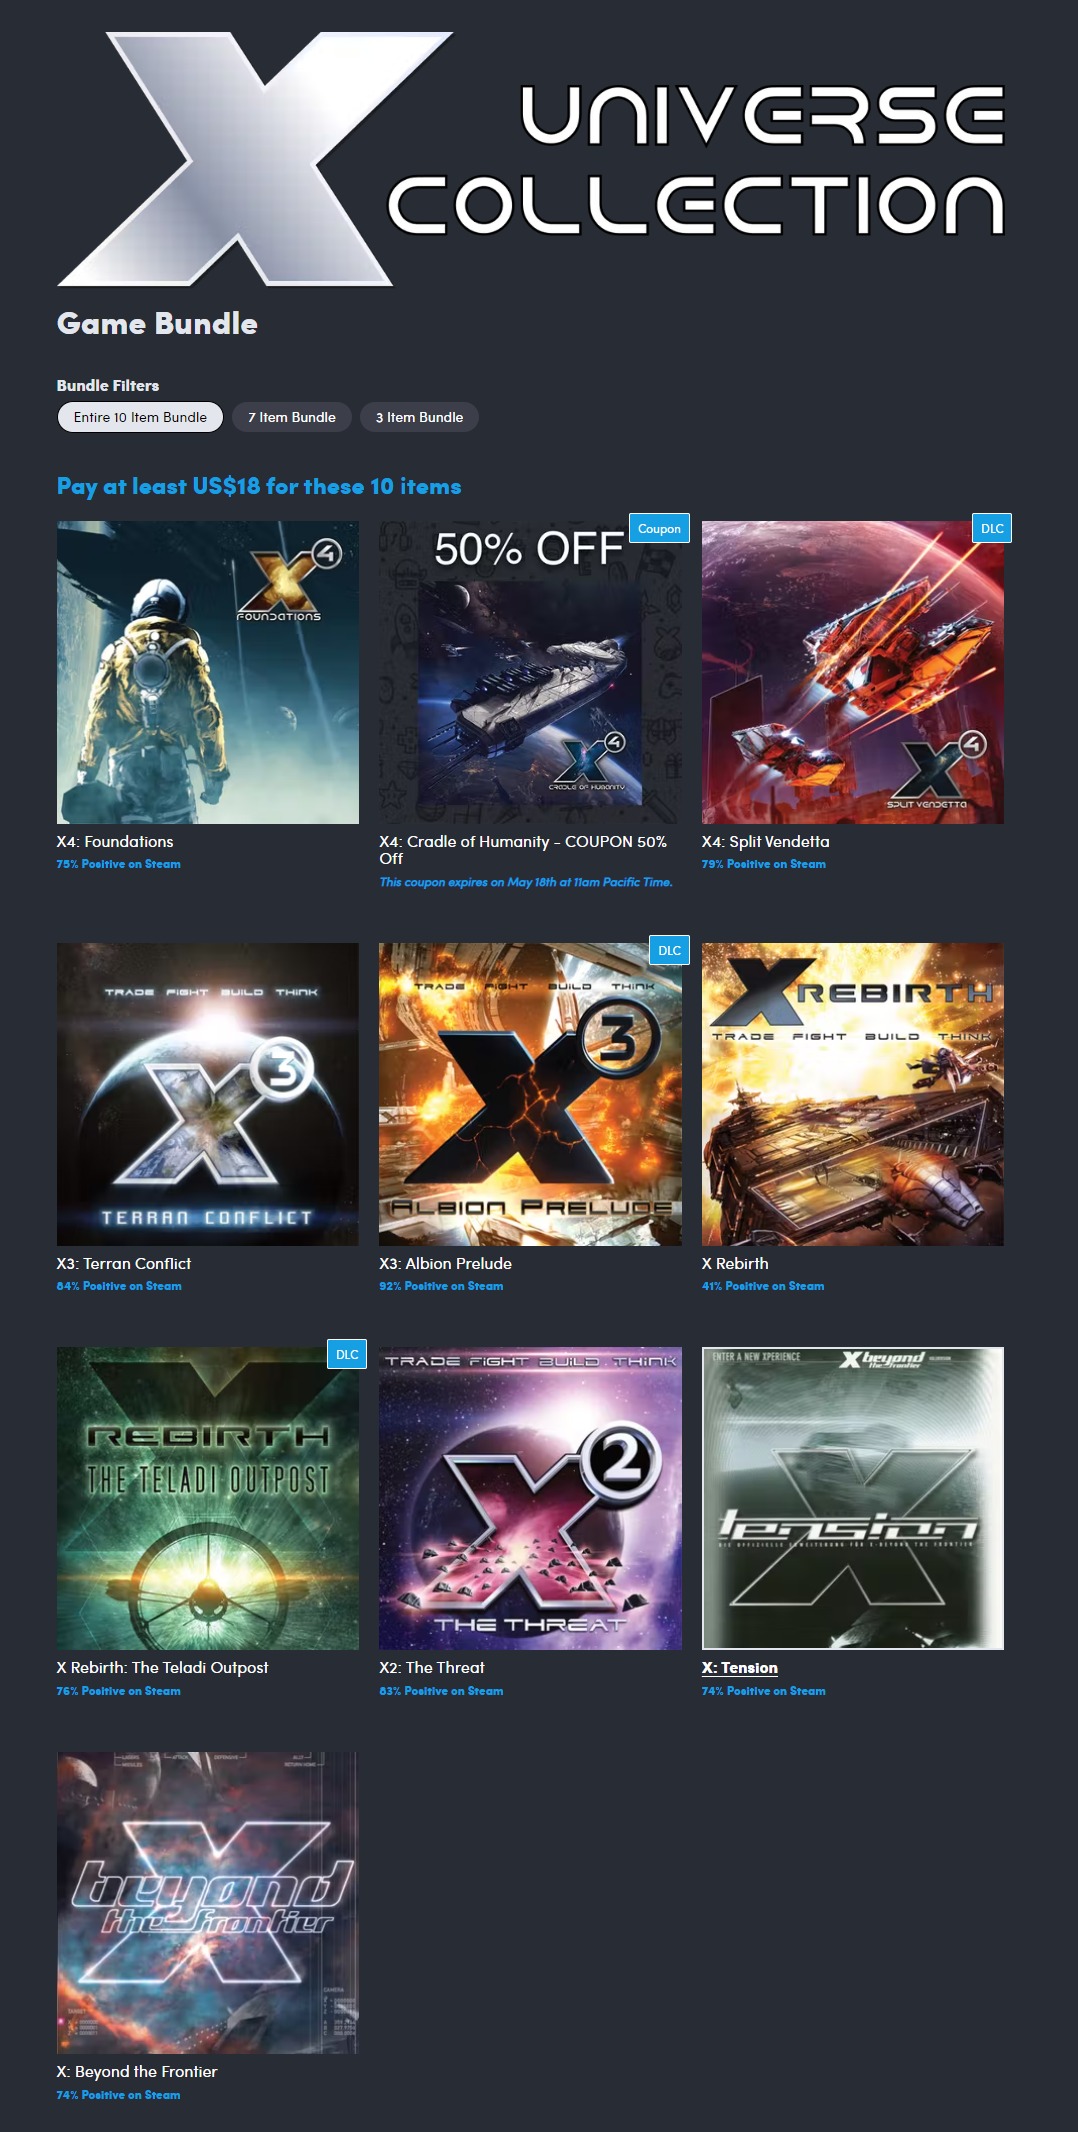 FireShot Capture 120 - The X Universe Collection (pay what you want and help charity)_ - www.humblebundle.com.jpg